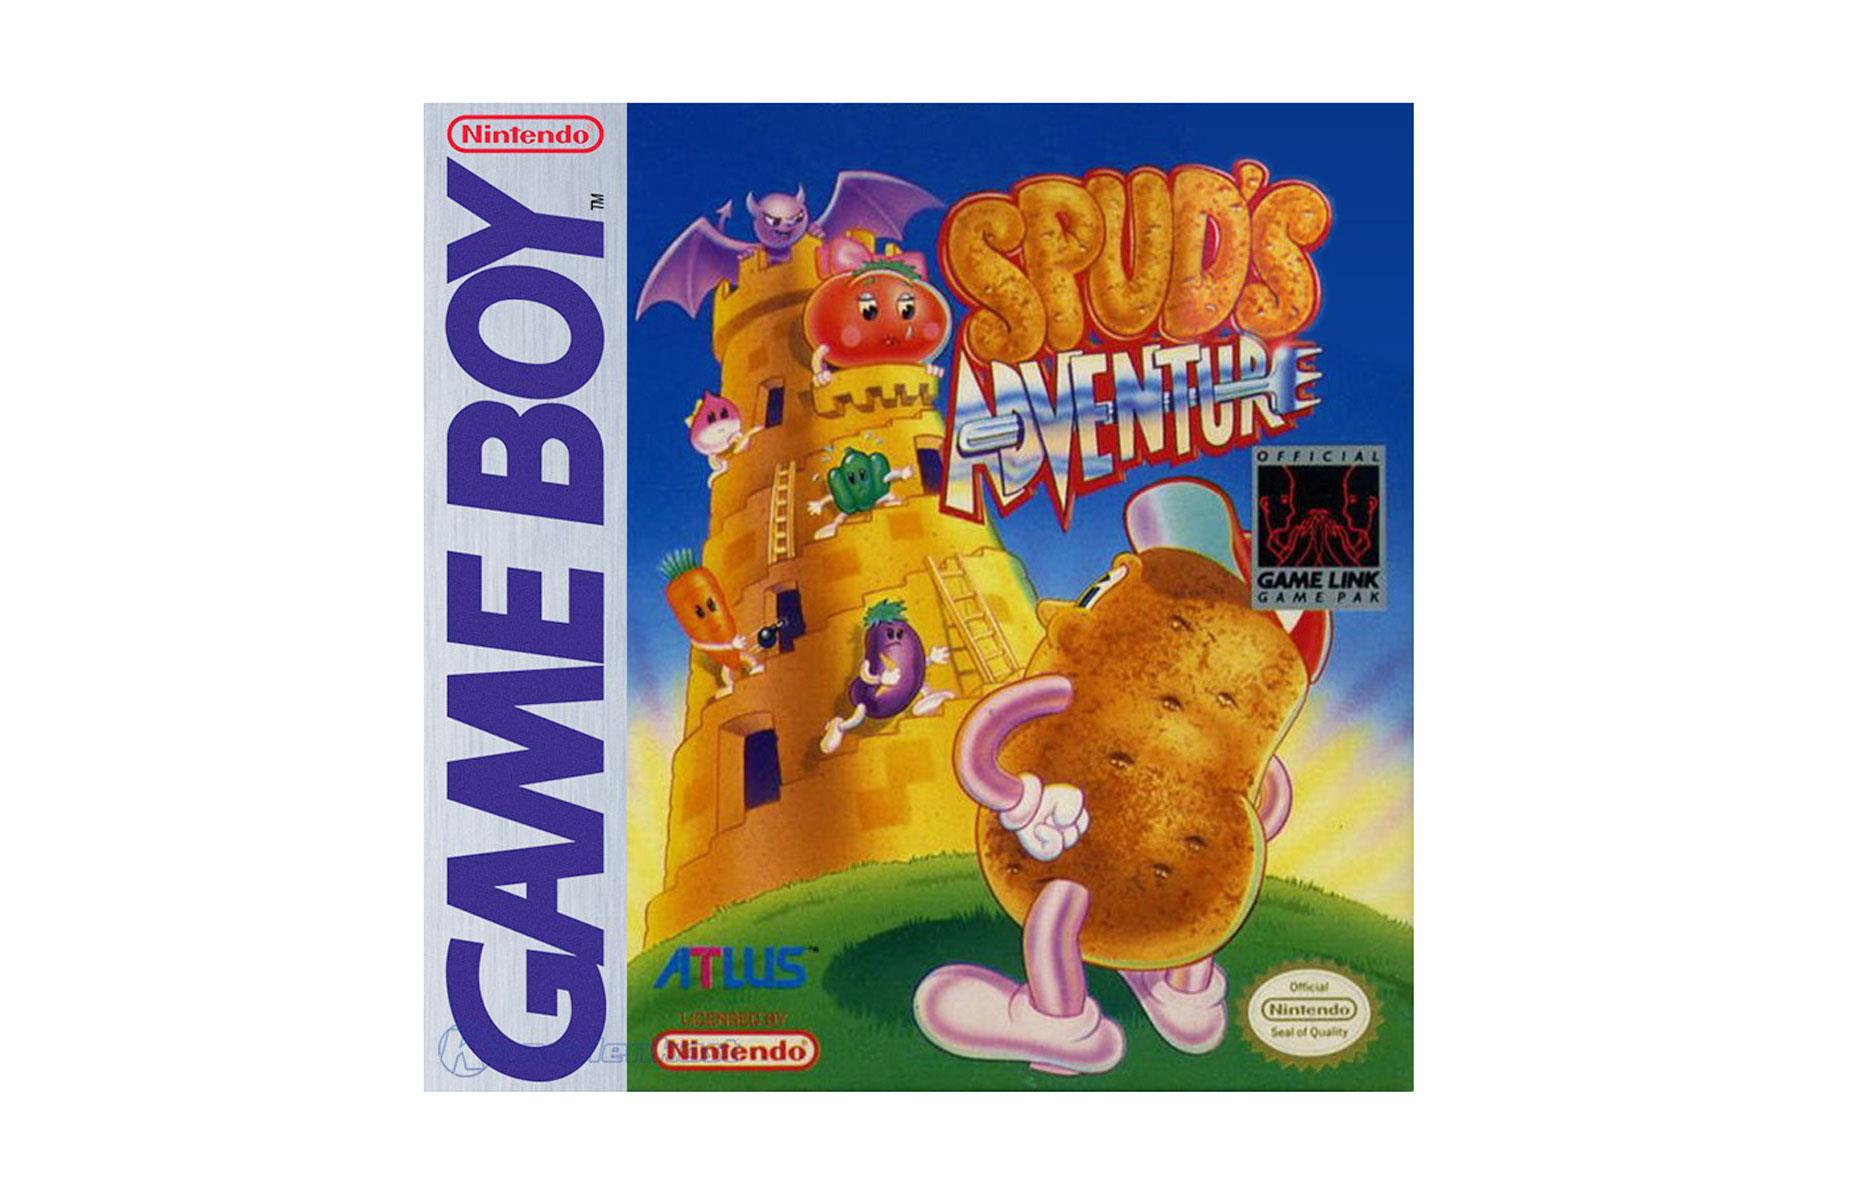 Spud's Adventure (Atlus) for Nintendo Game Boy, 1991: up to $2,100 (£1.5k)